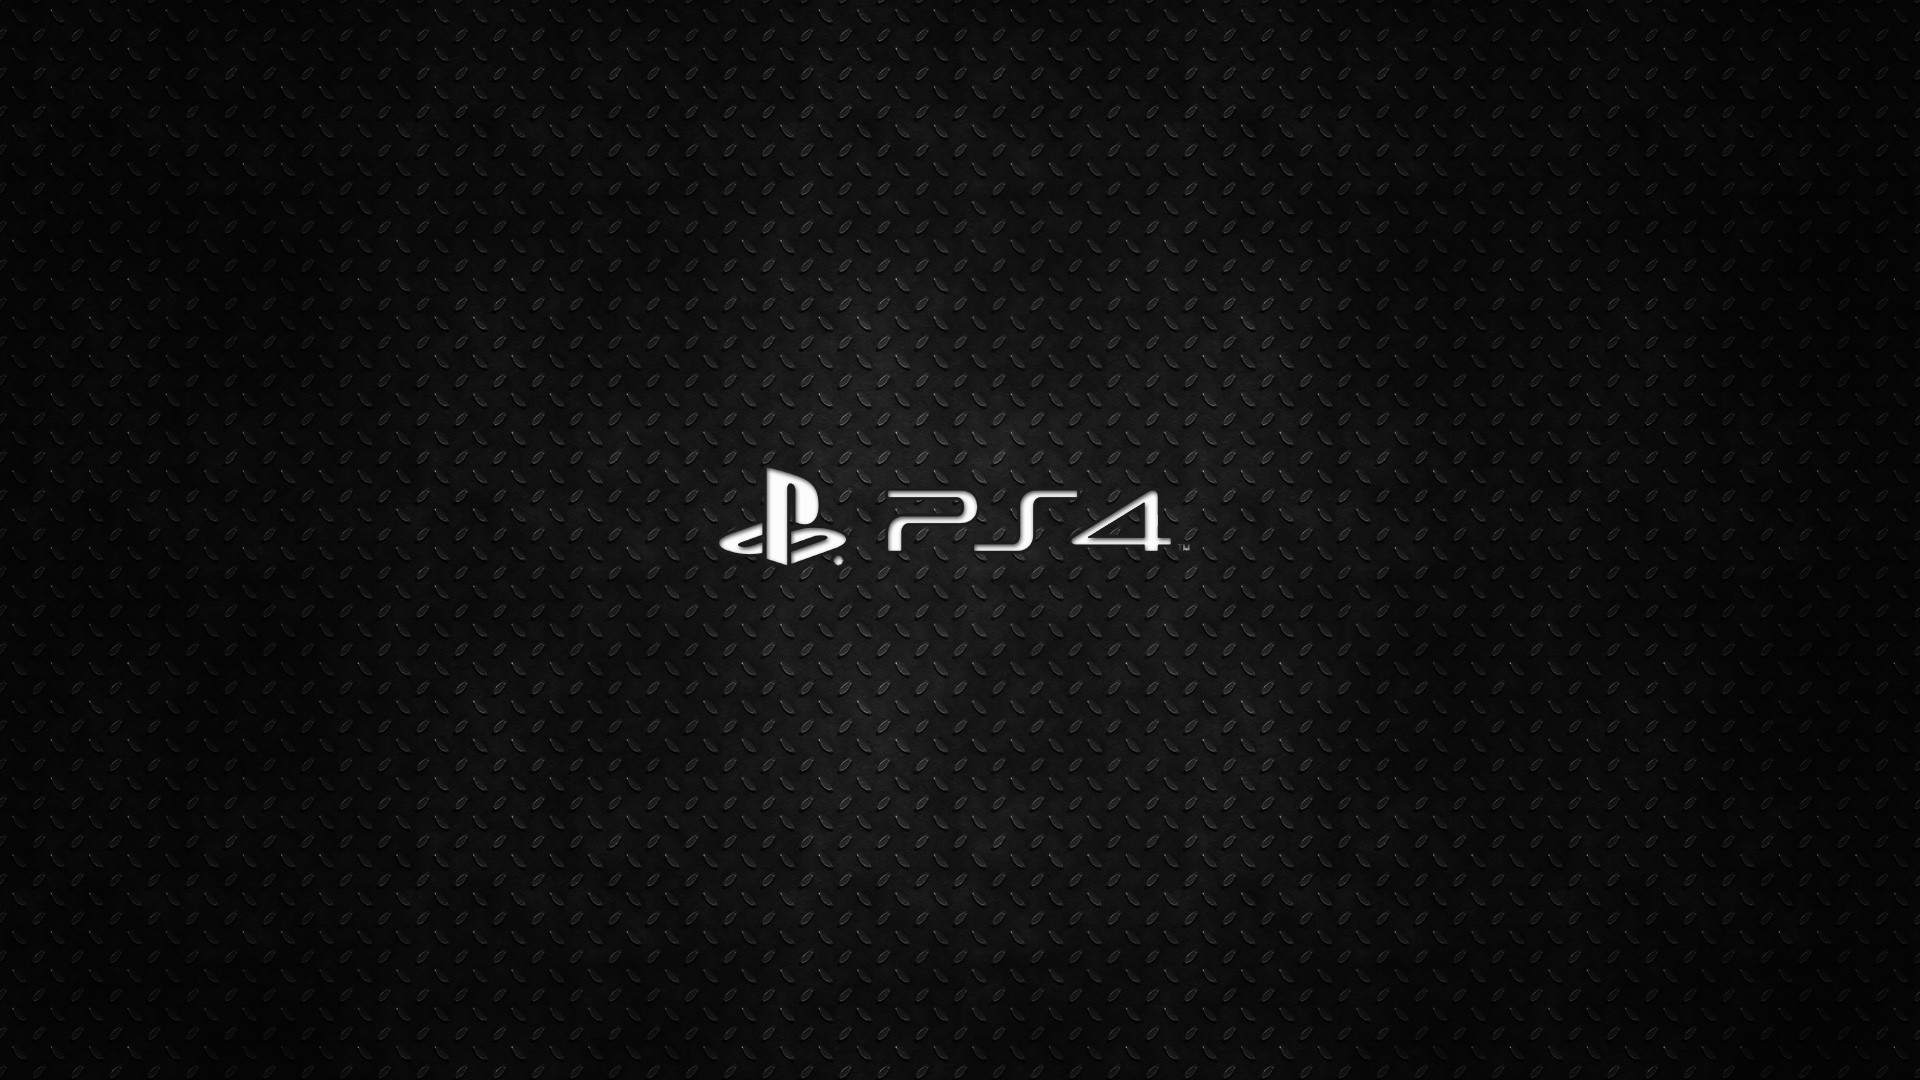 ps4 wallpaper download, free ps4 background